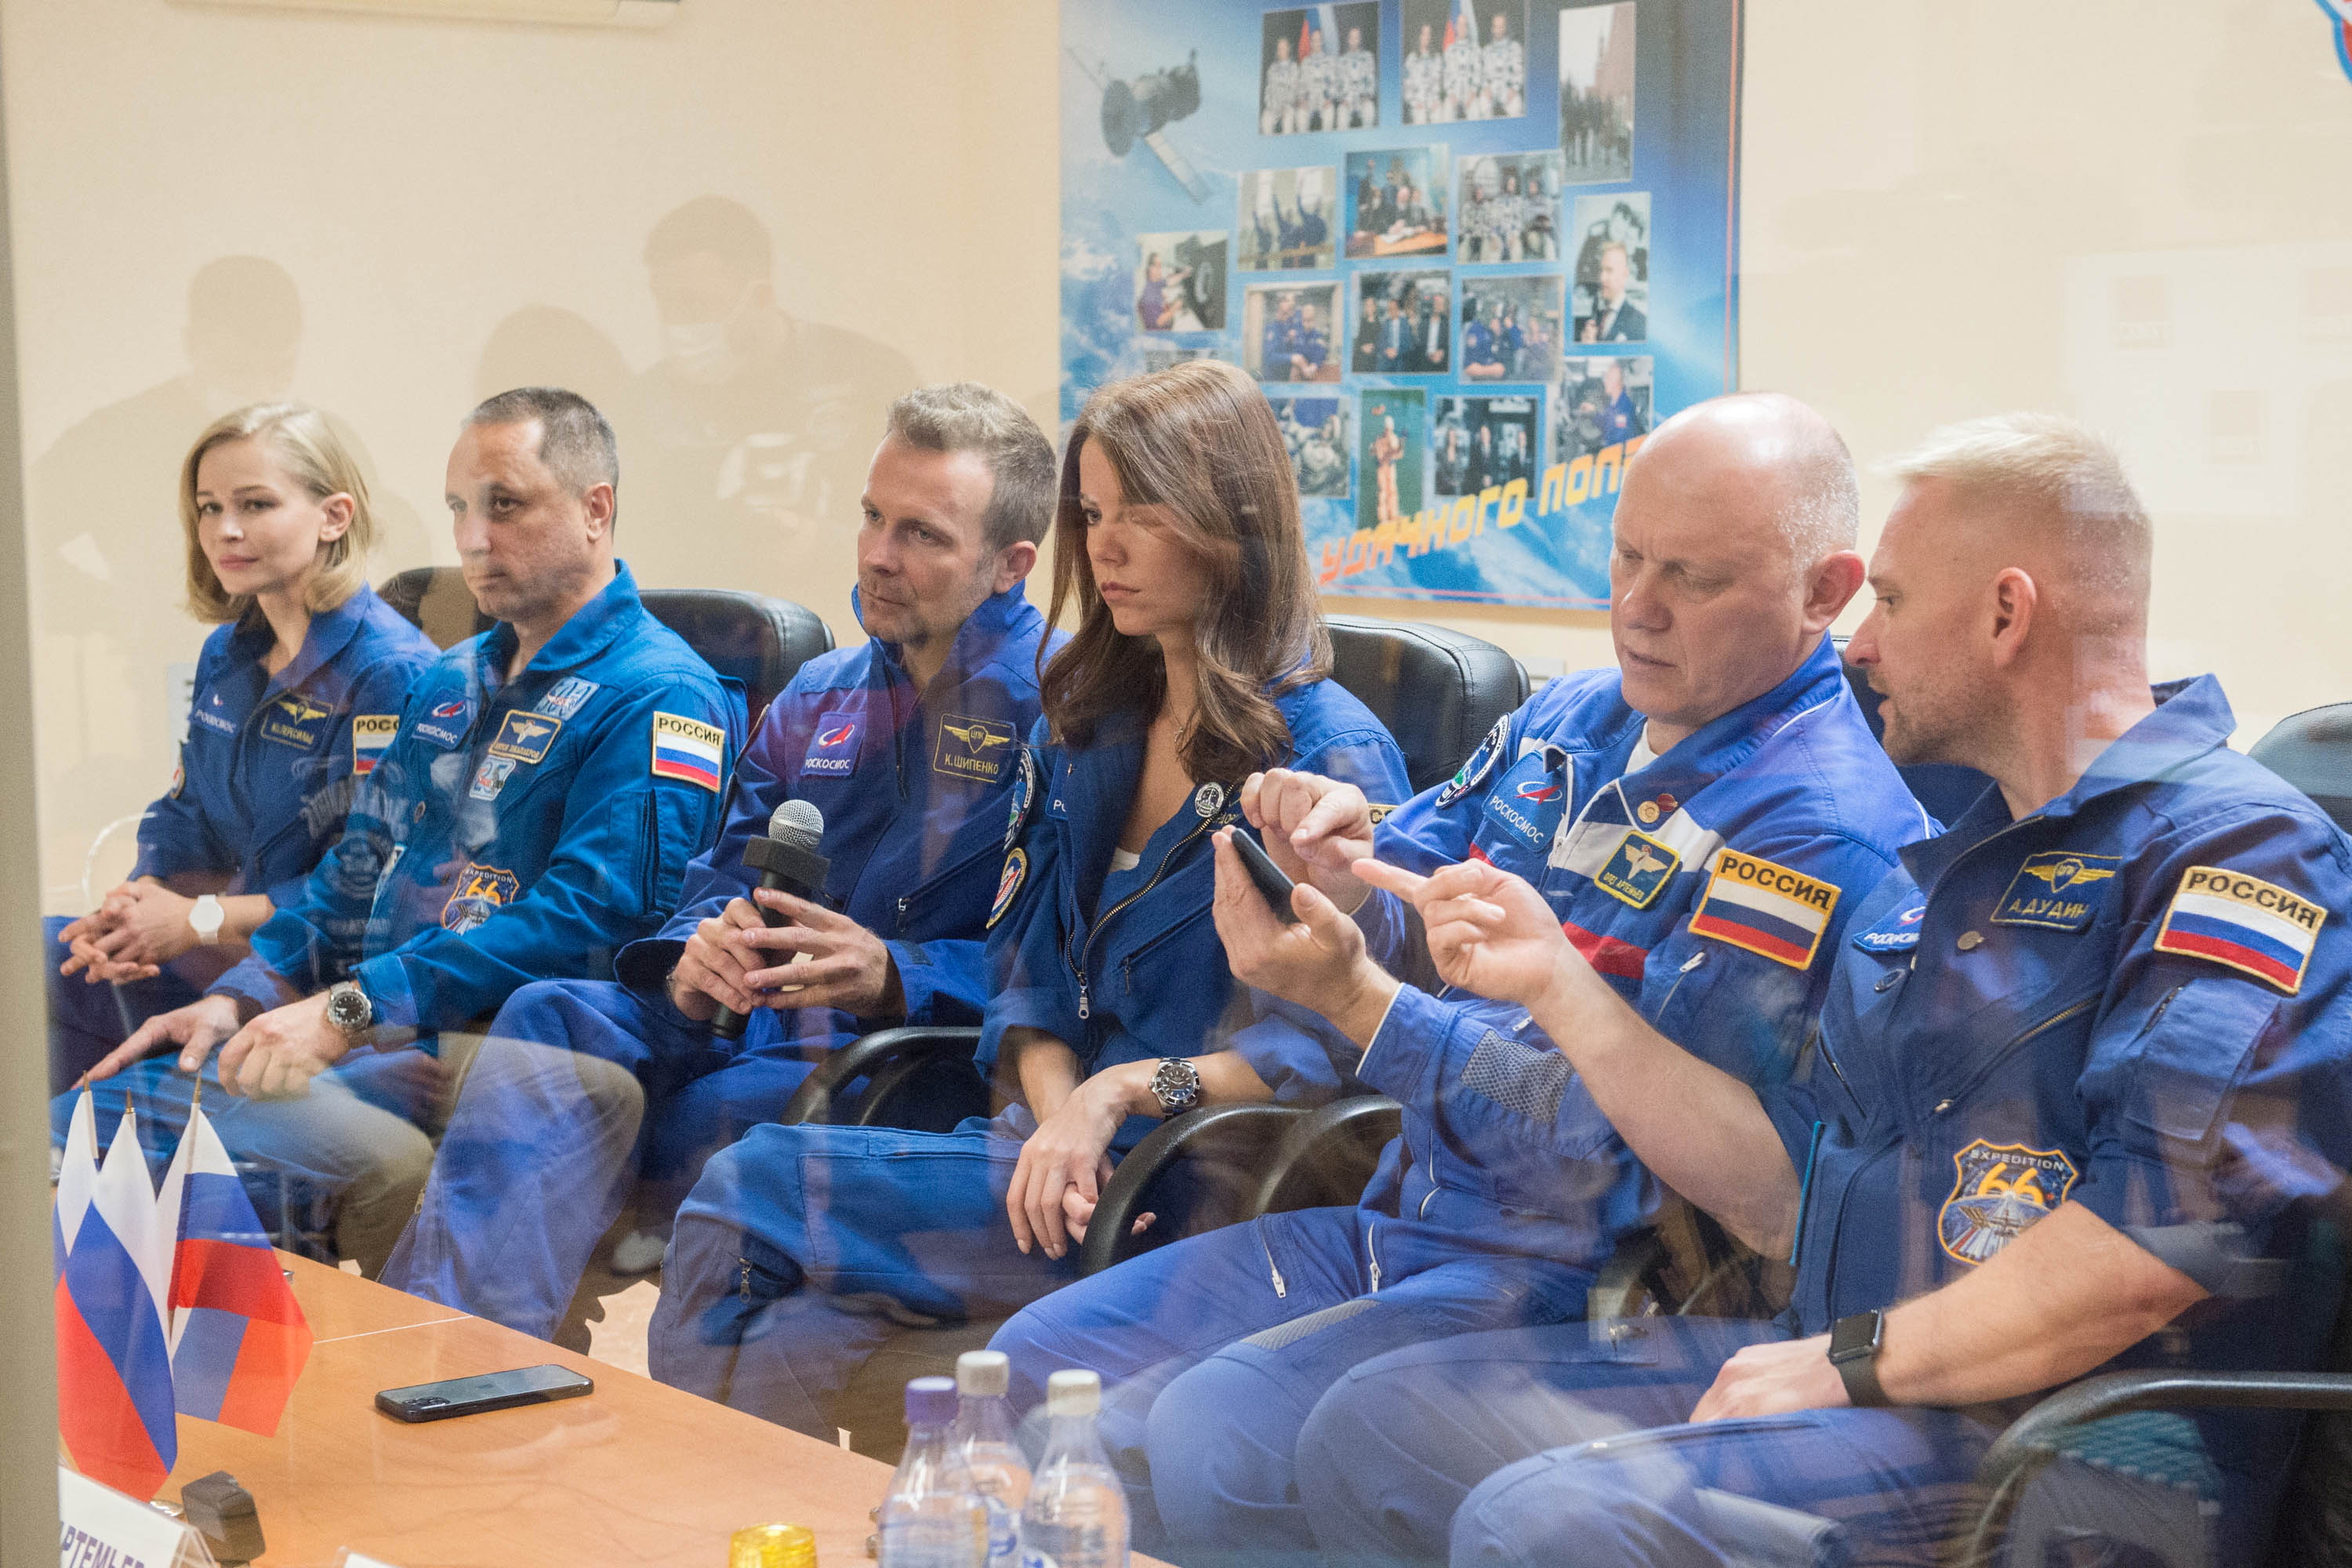 Crew members, Anton Shkaplerov, Yulia Peresild and Klim Shipenko, and back-up crew members, Oleg Artemyev, Alyona Mordovina and Alexei Dudin, sit behind a glass wall during a news conference ahead of the expedition to the International Space Station (ISS) at the Baikonur Cosmodrome, Kazakhstan October 4, 2021. The launch is scheduled for October 5, 2021. Andrey Shelepin/GCTC/Roscosmos/Handout via REUTERS  